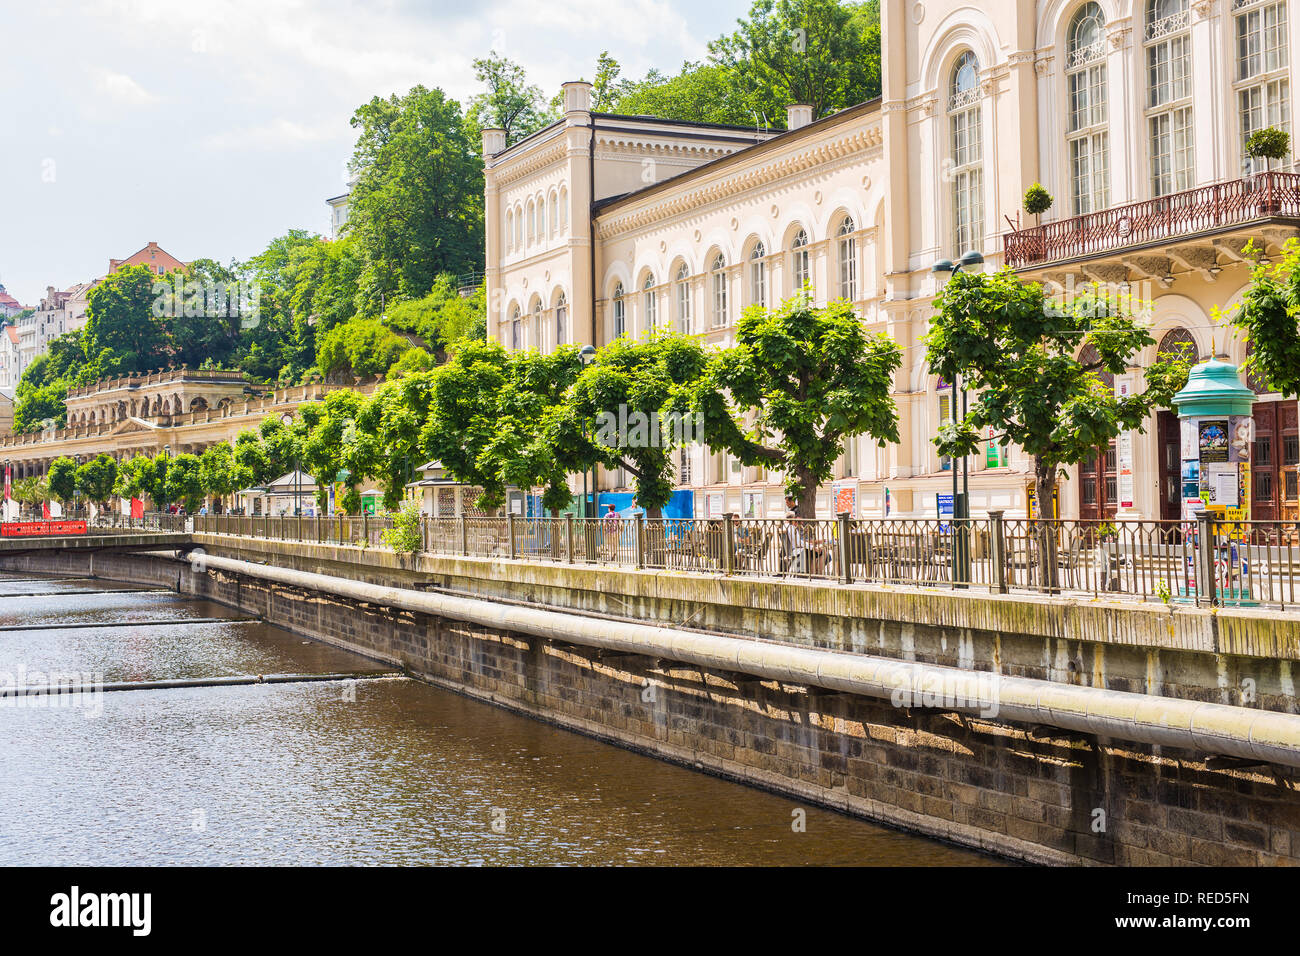 KARLOVY VARY, CZECH REPUBLIC - JUNE 12, 2017: Karlovy Vary view from river Tepla. Architecture of Karlovy Vary, Czech Republic. It is the most visited spa town in the Czech Republic Stock Photo